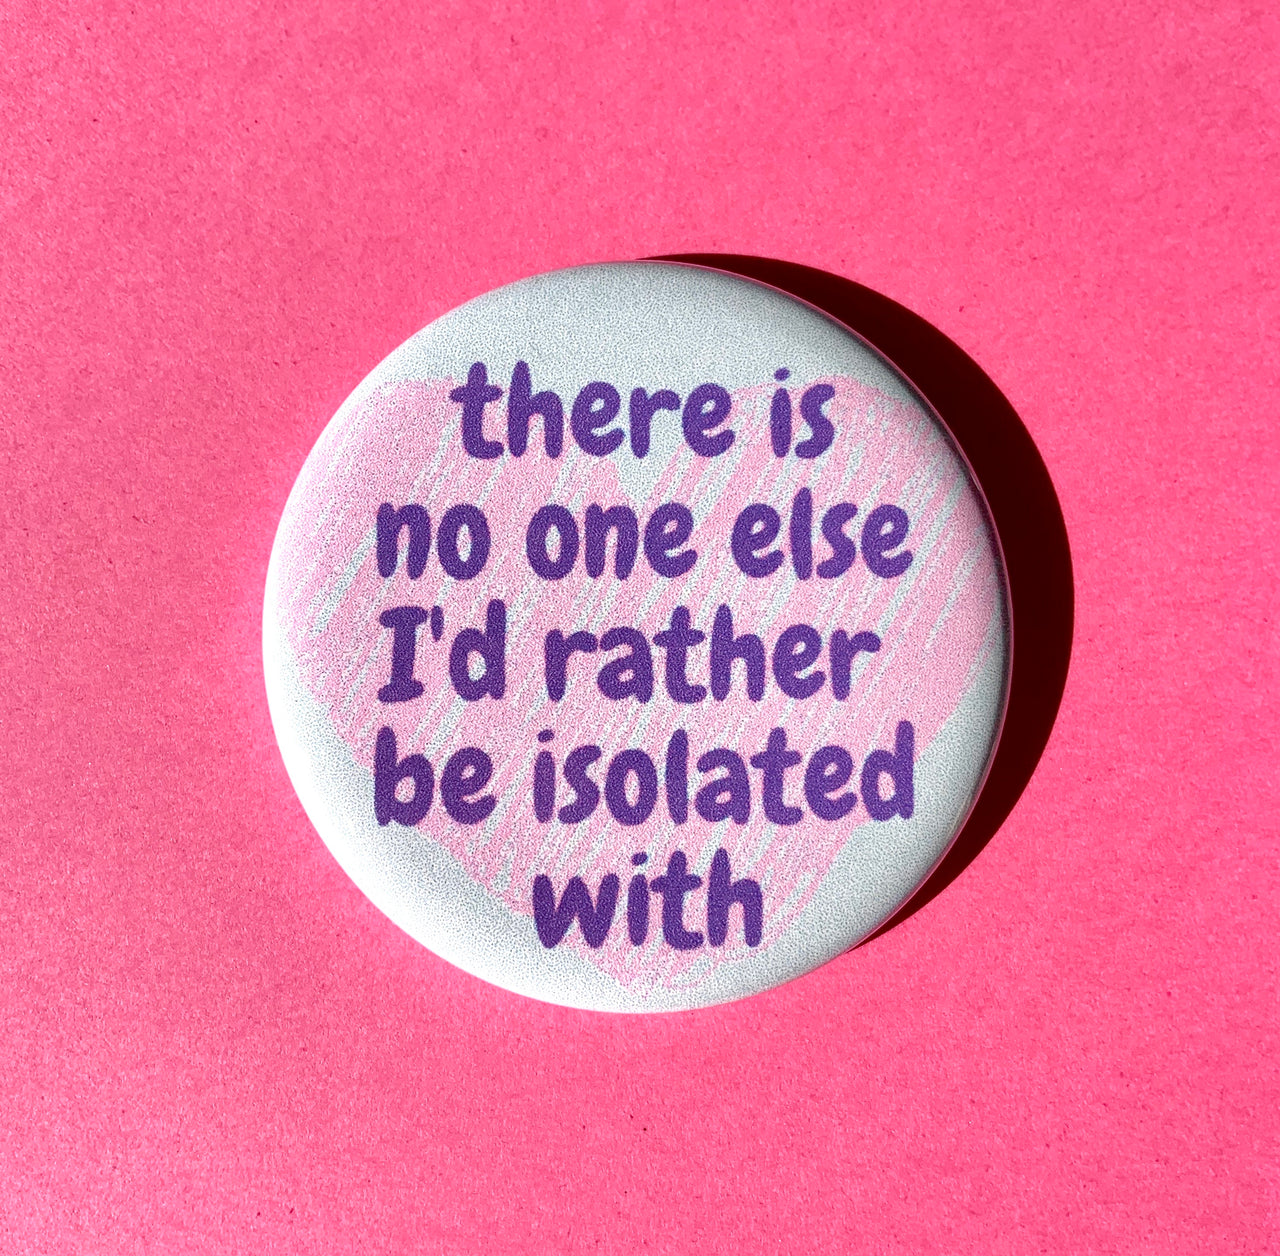 There is no one else I’d rather be isolated with - Radical Buttons